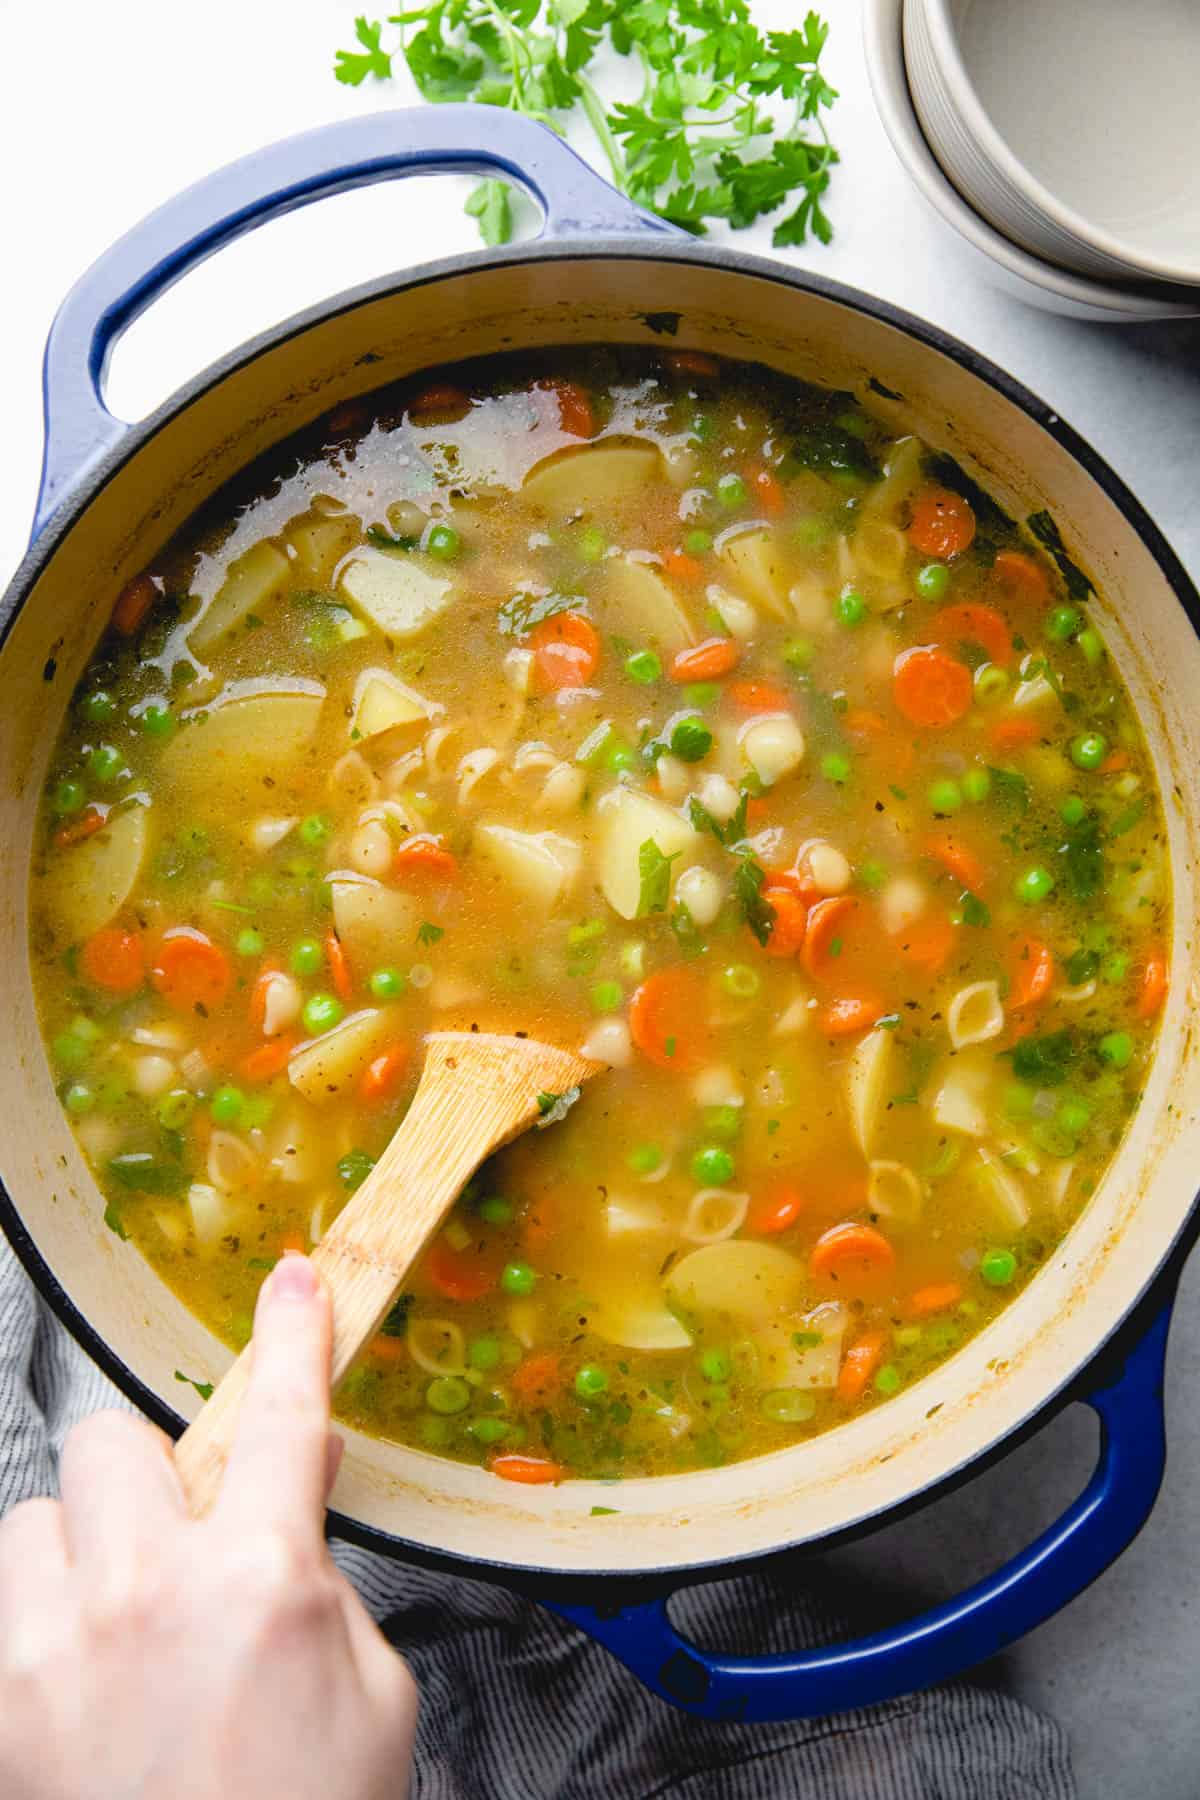 Soup with onions, carrots, potatoes, peas, and pasta in a pot.